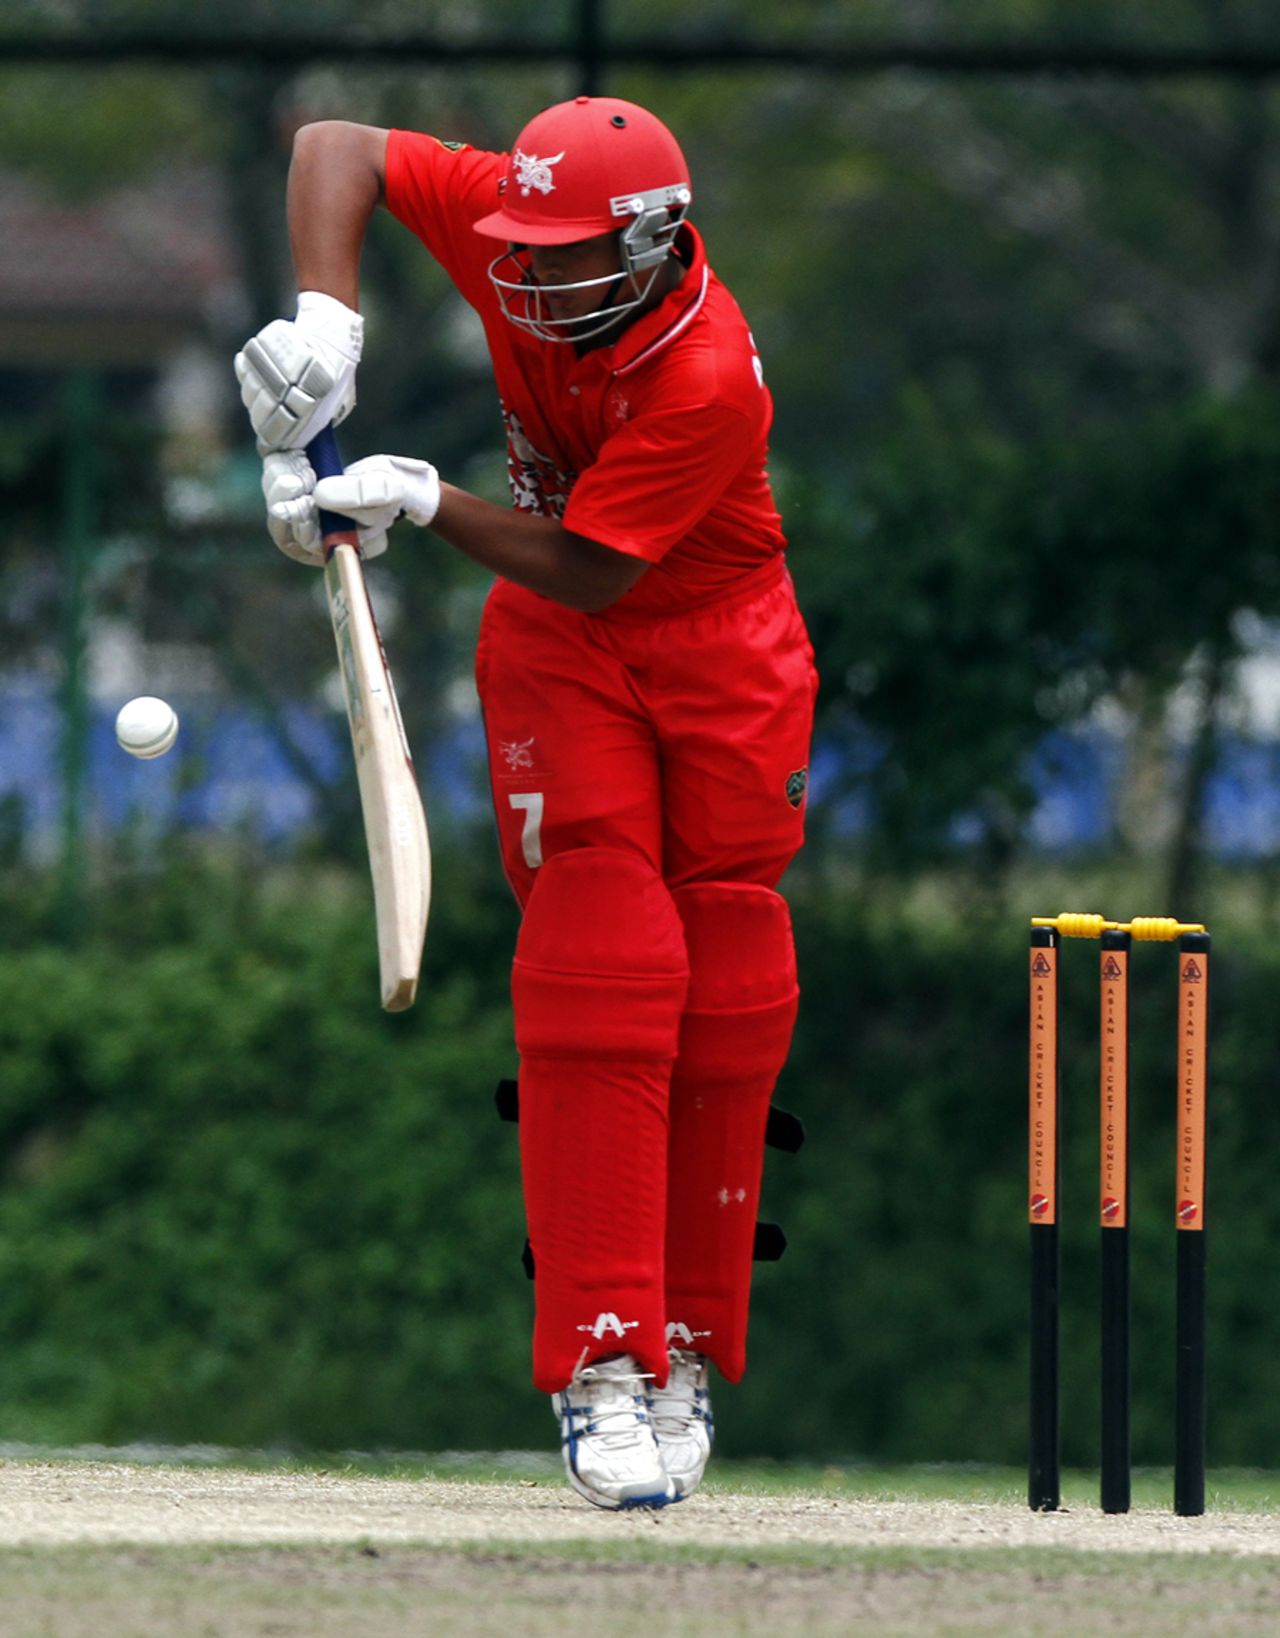 Anshuman Rath gets up on his toes to defend a ball during his innings of 81 against UAE U19 at the Kinrara Oval during the ACC Under-19 Elite 2013 being played in Kuala Lumpur, Malaysia